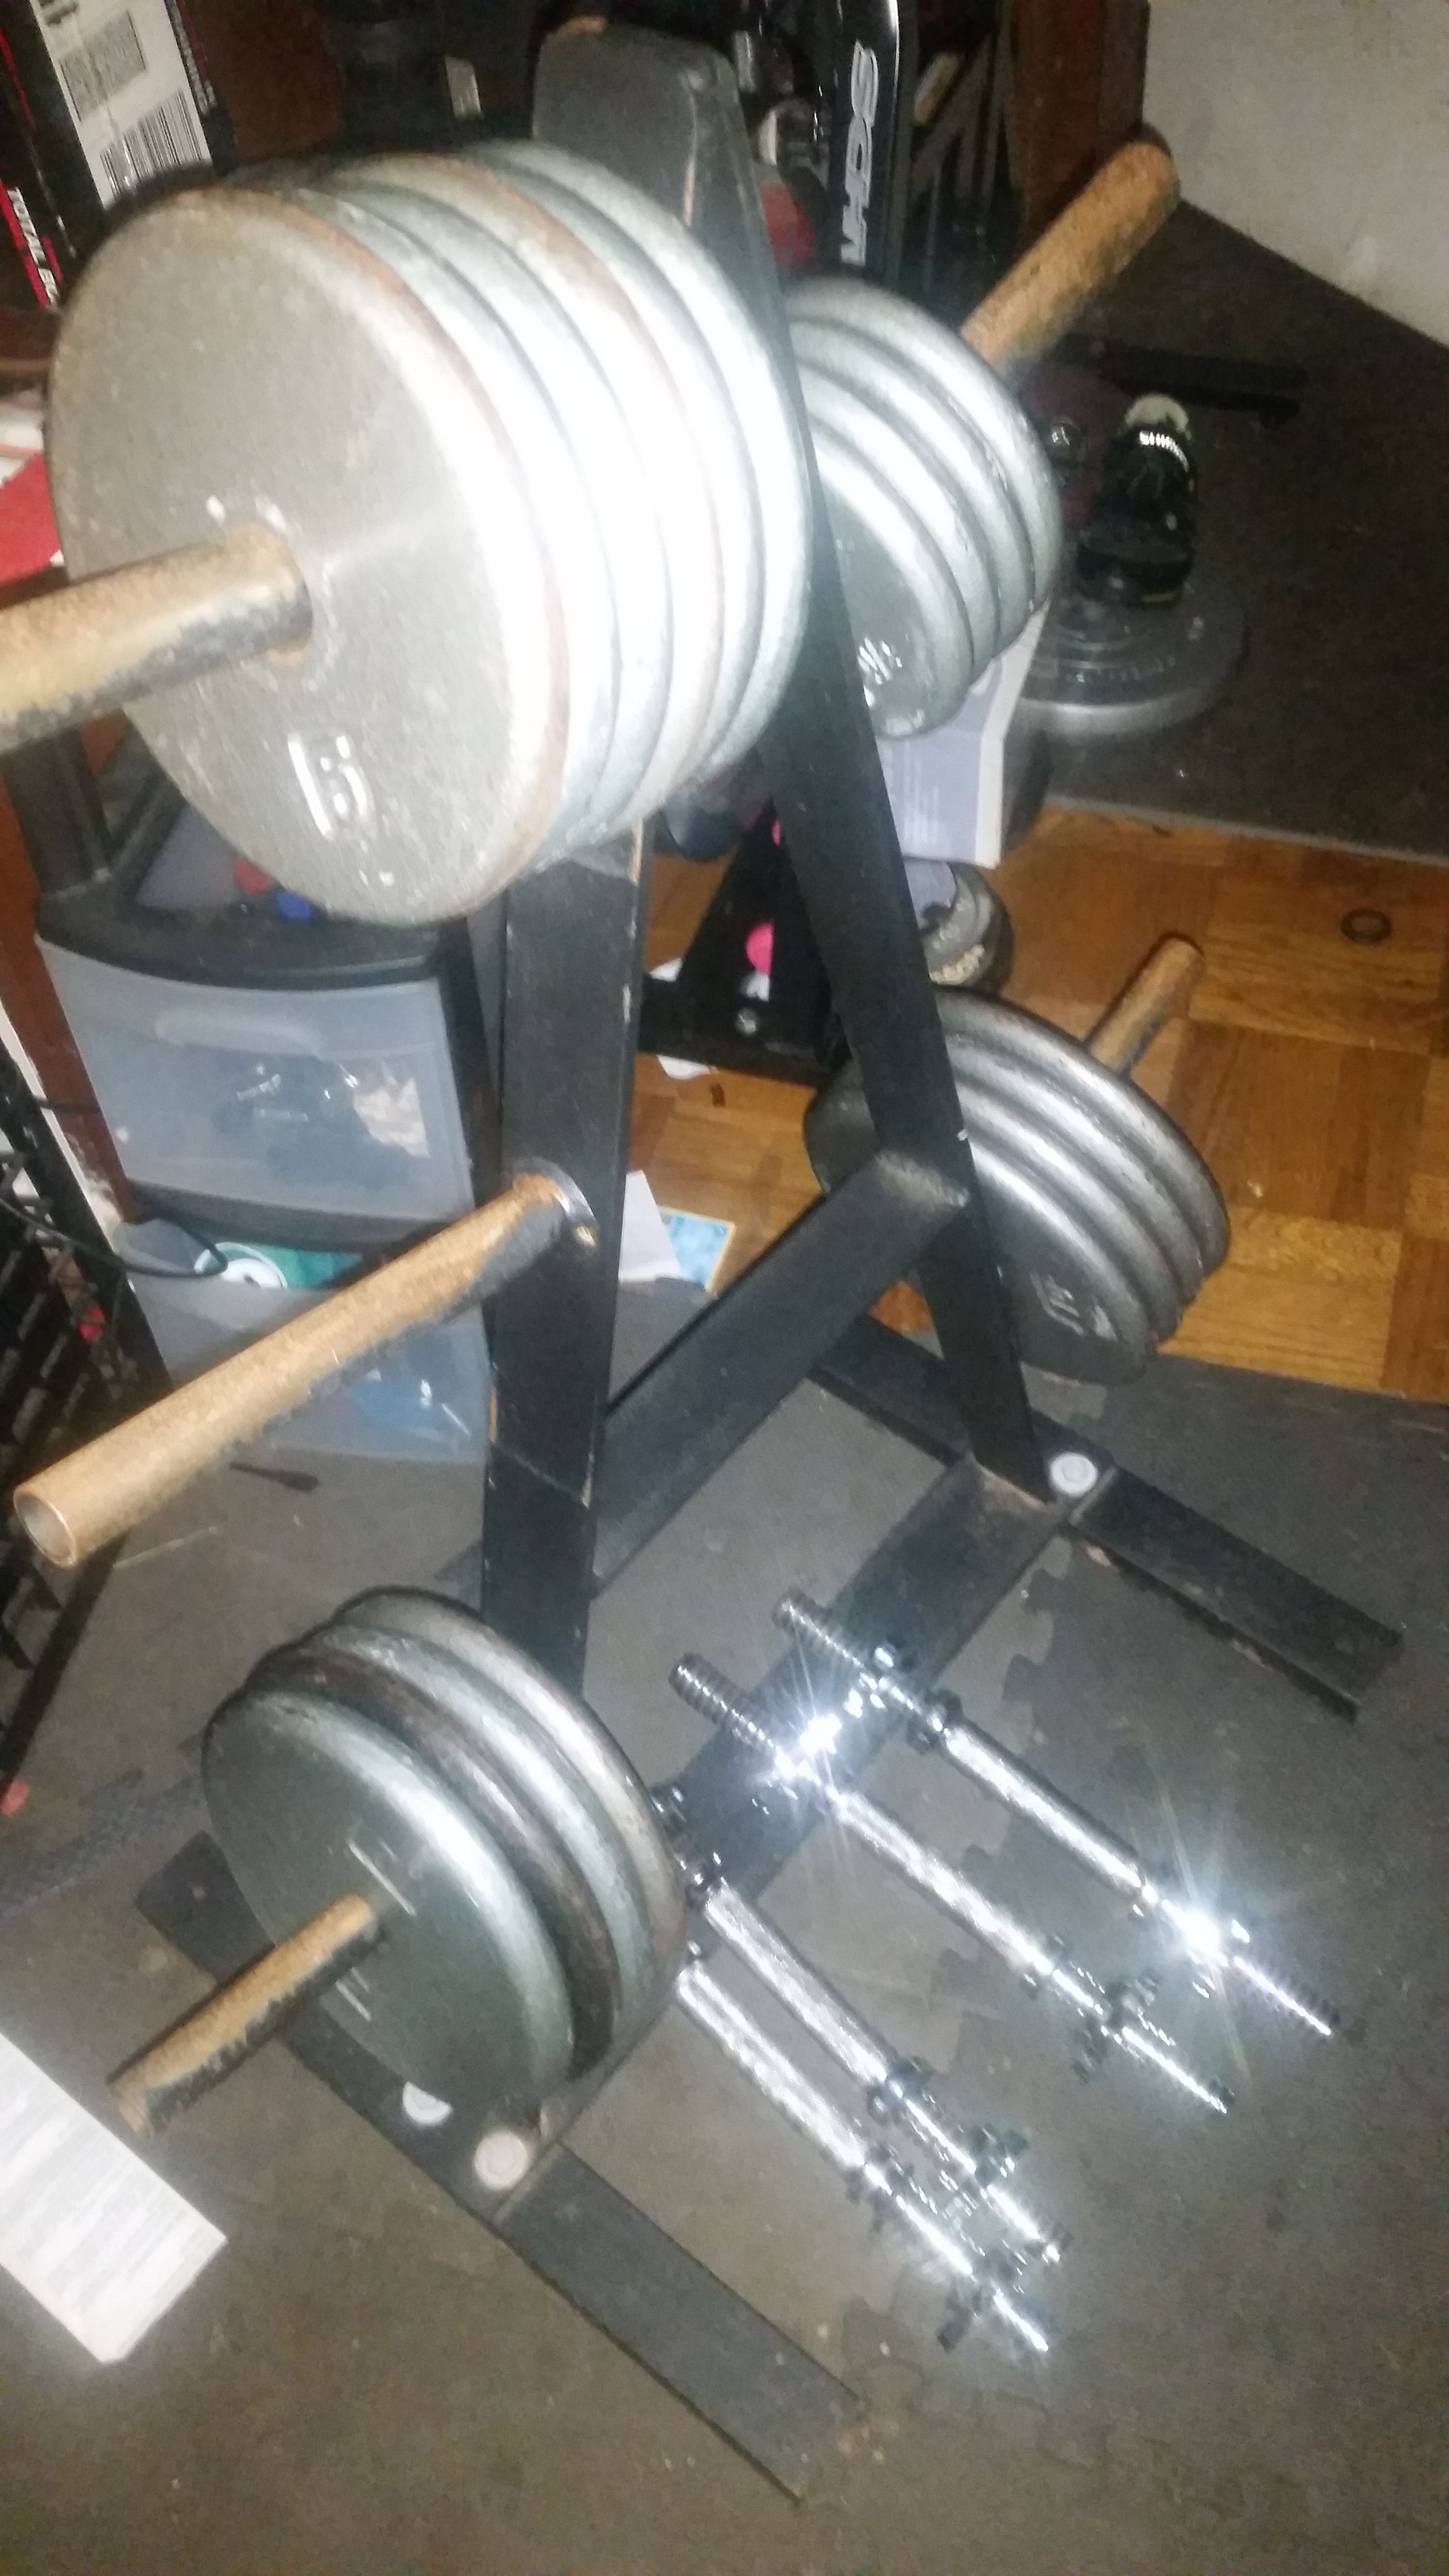 Rack, weights and bars